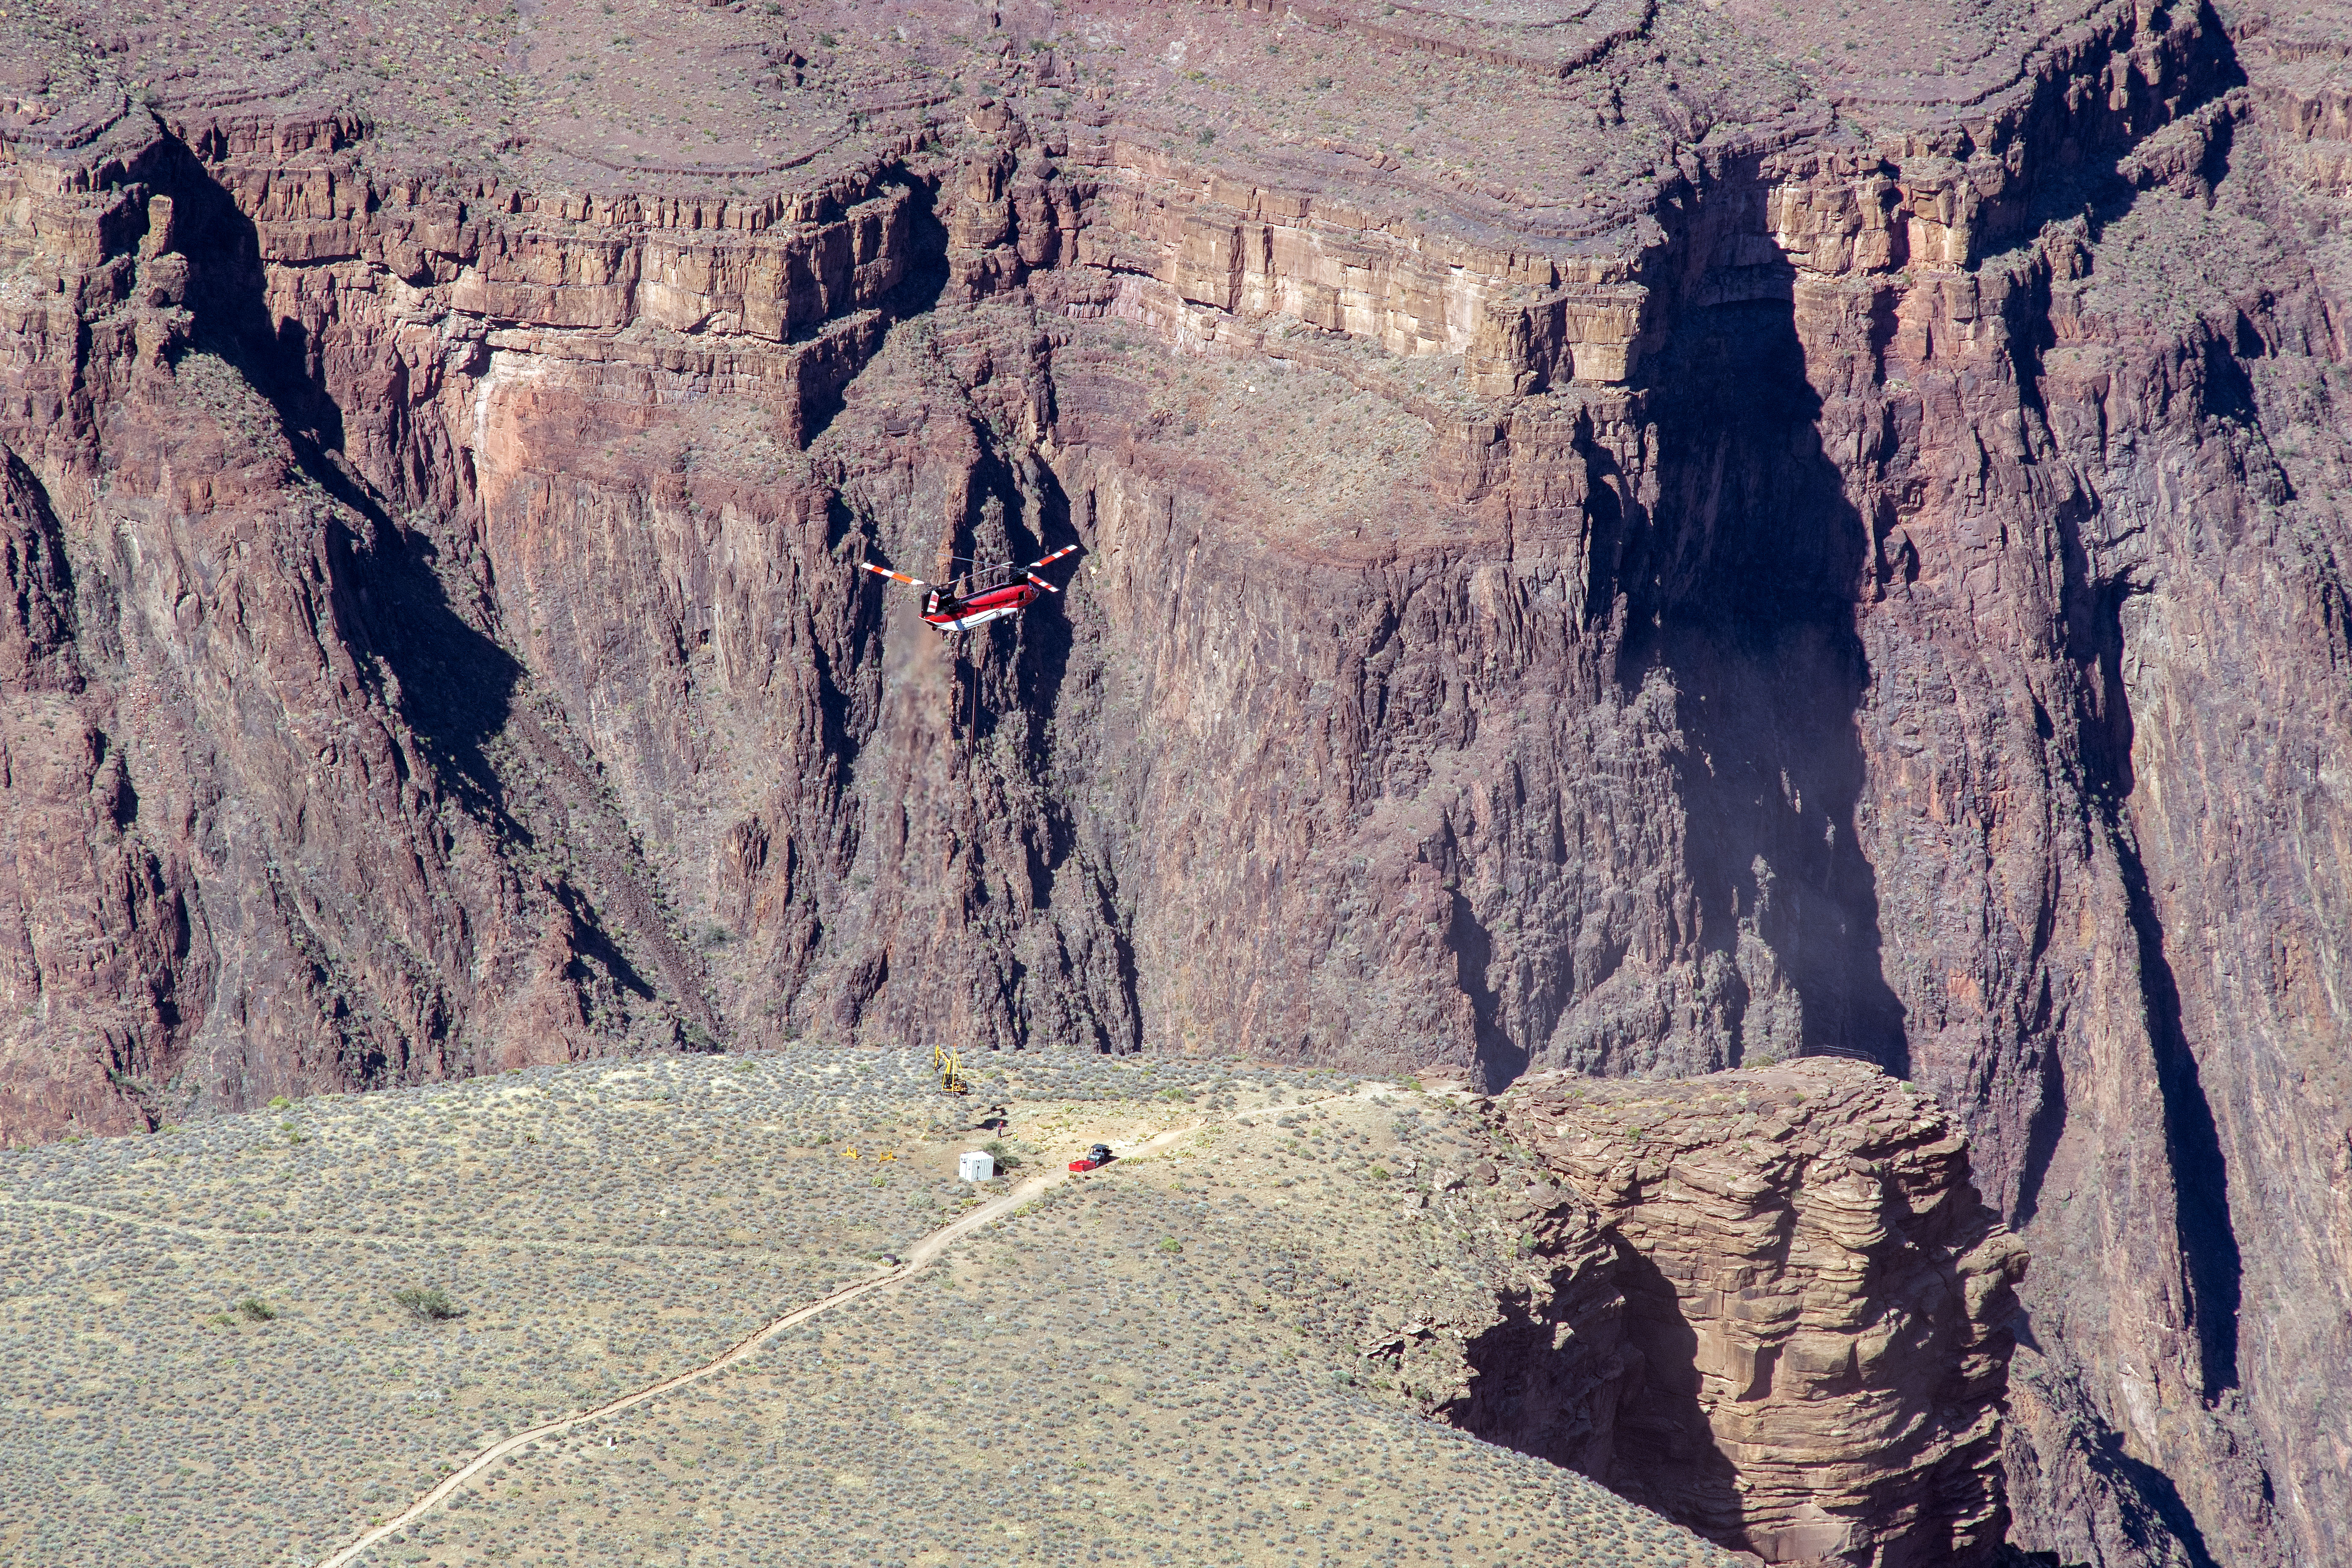 A heavy lift helicopter delivers construction equipment and materials to Plateau Point in the inner canyon